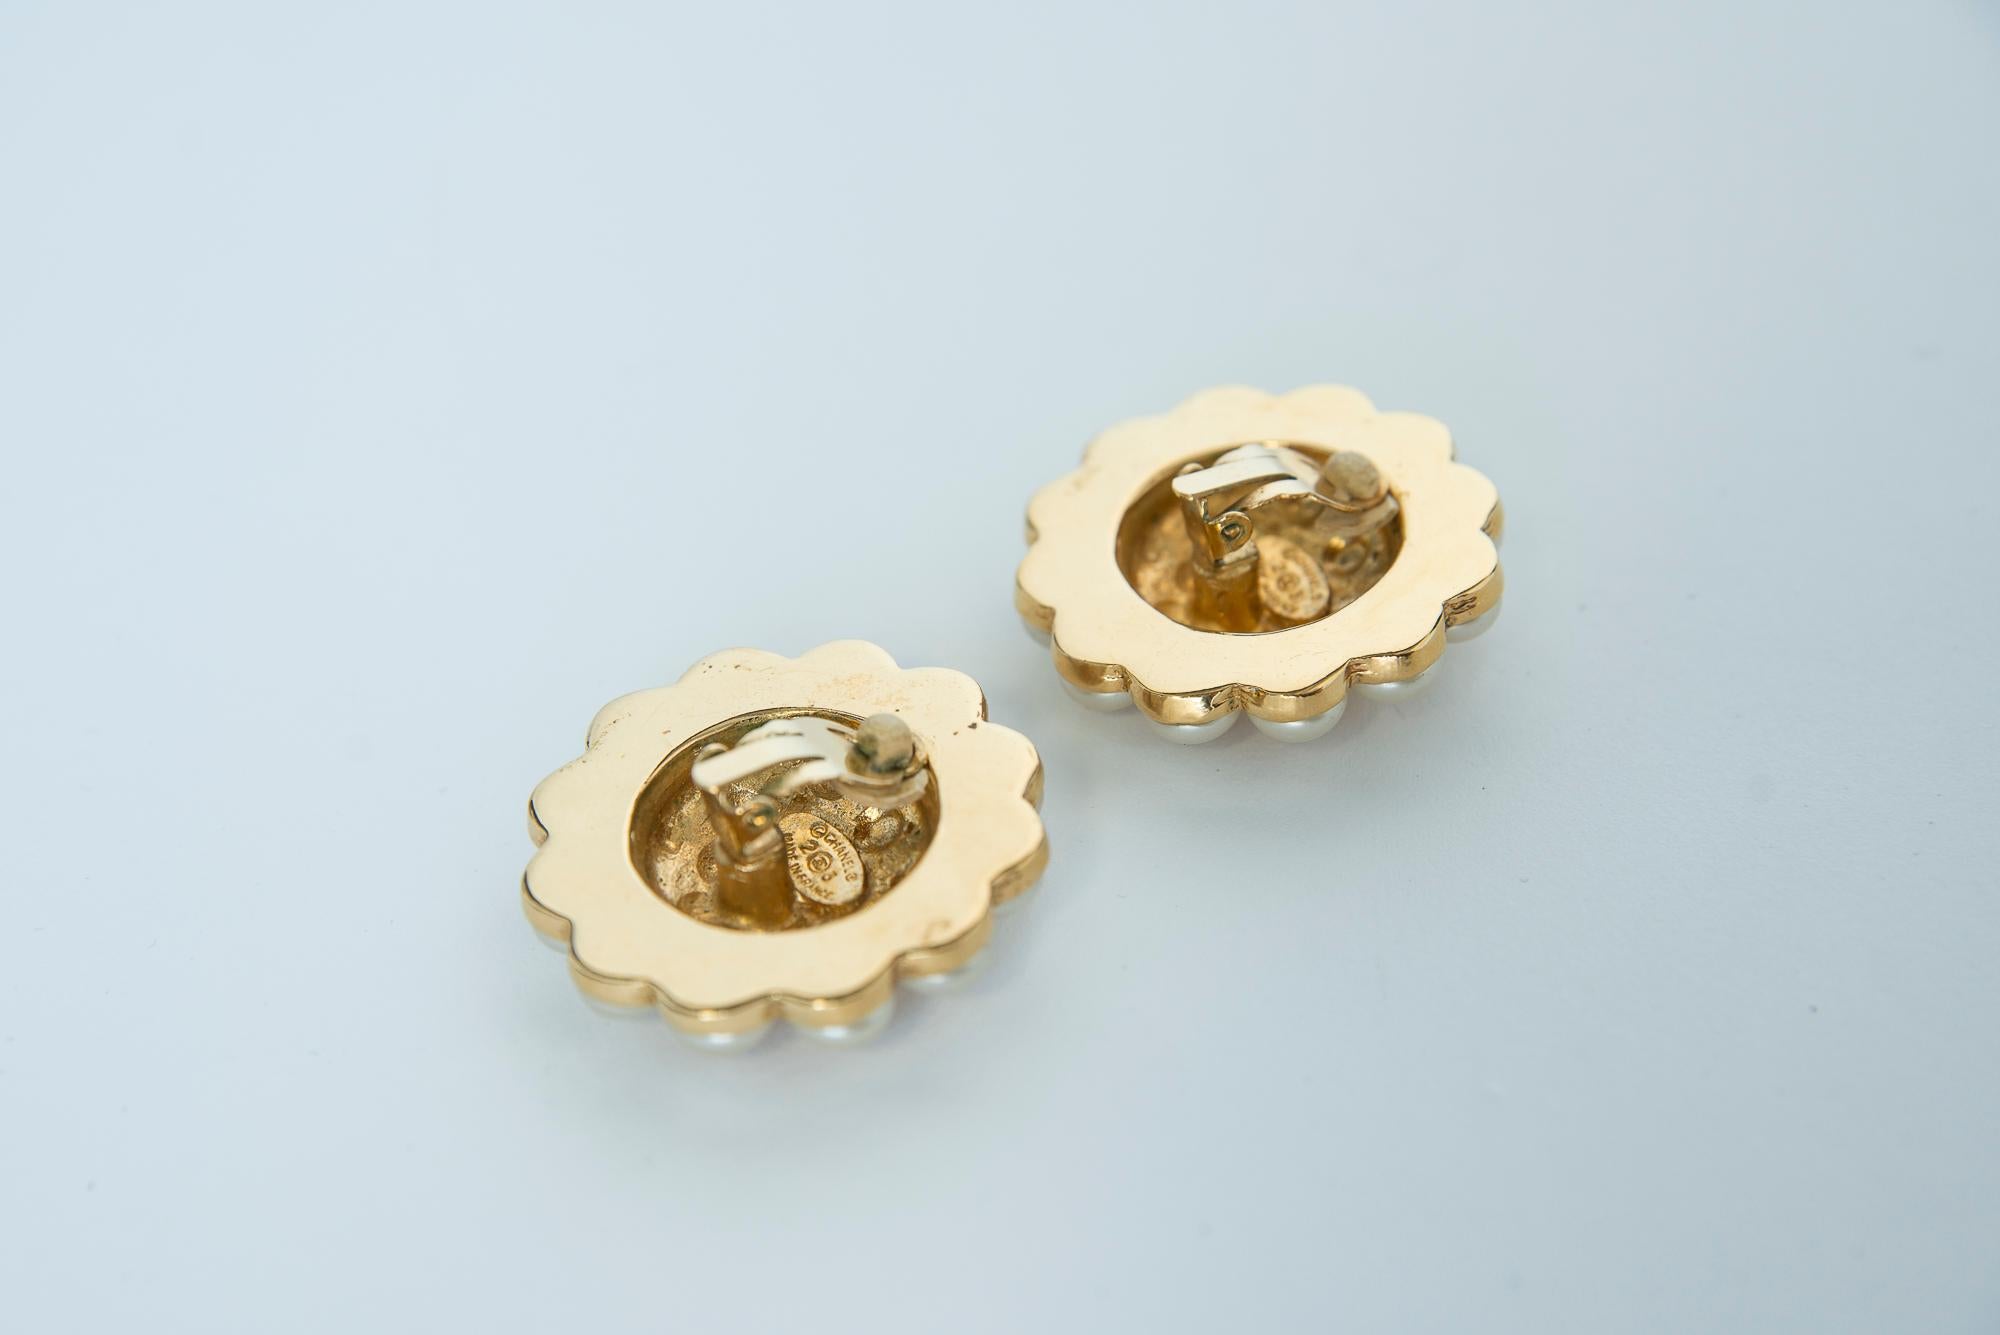 Chanel By Karl Lagerfeld Oversized Gold-Tone & Faux Pearls CC Clip-On Earrings For Sale 2